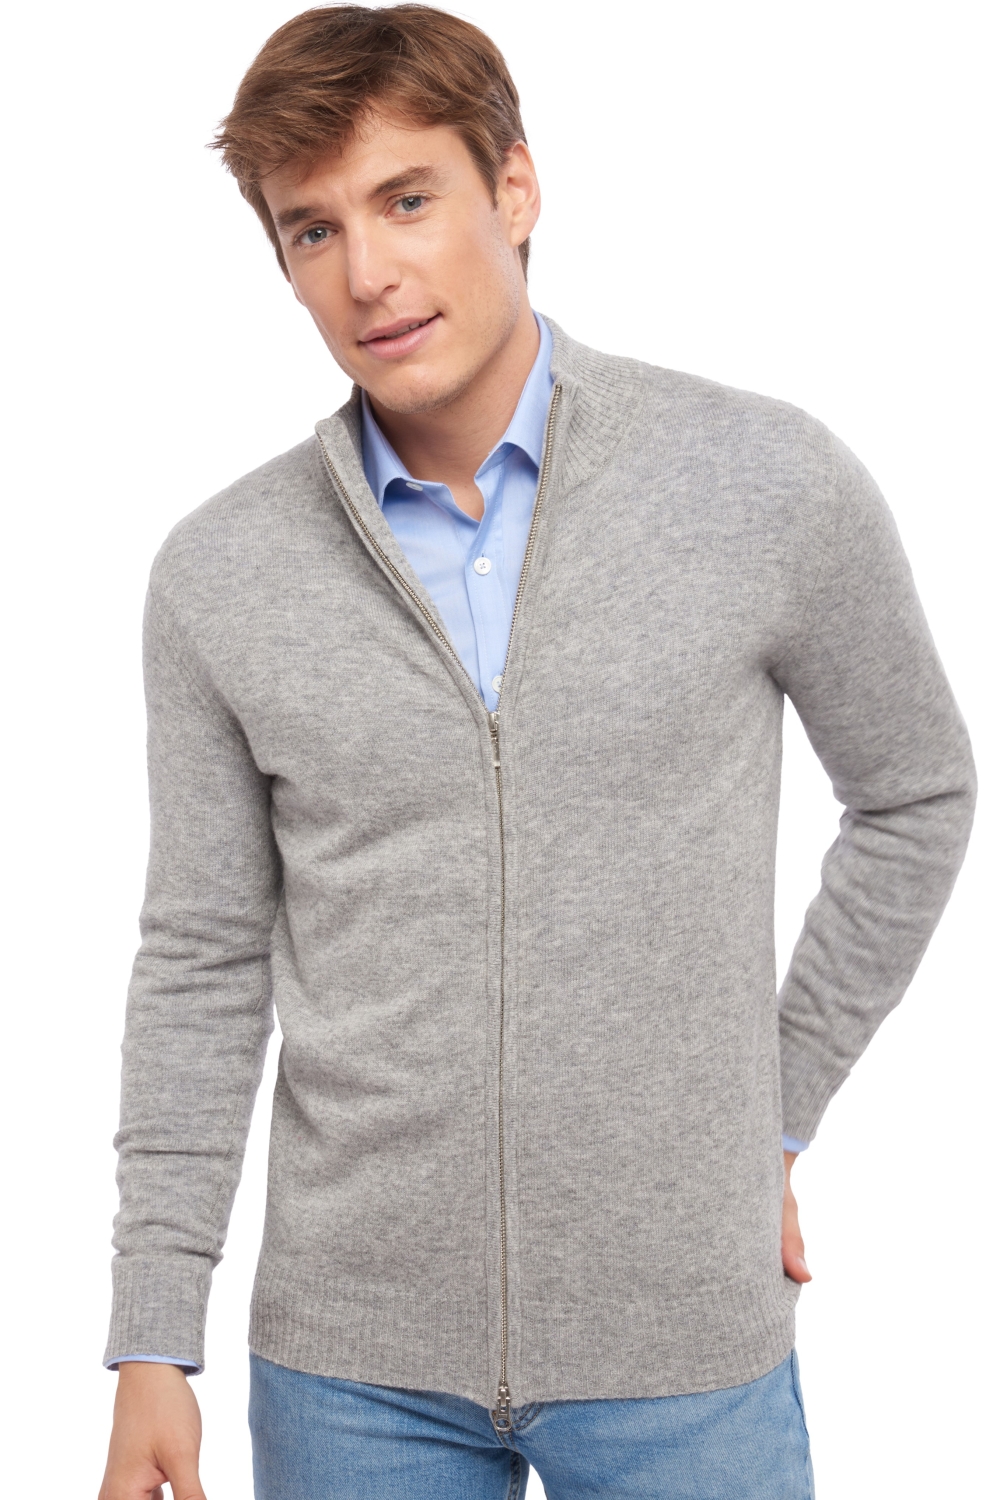 Cashmere men basic sweaters at low prices thobias first fog grey xl